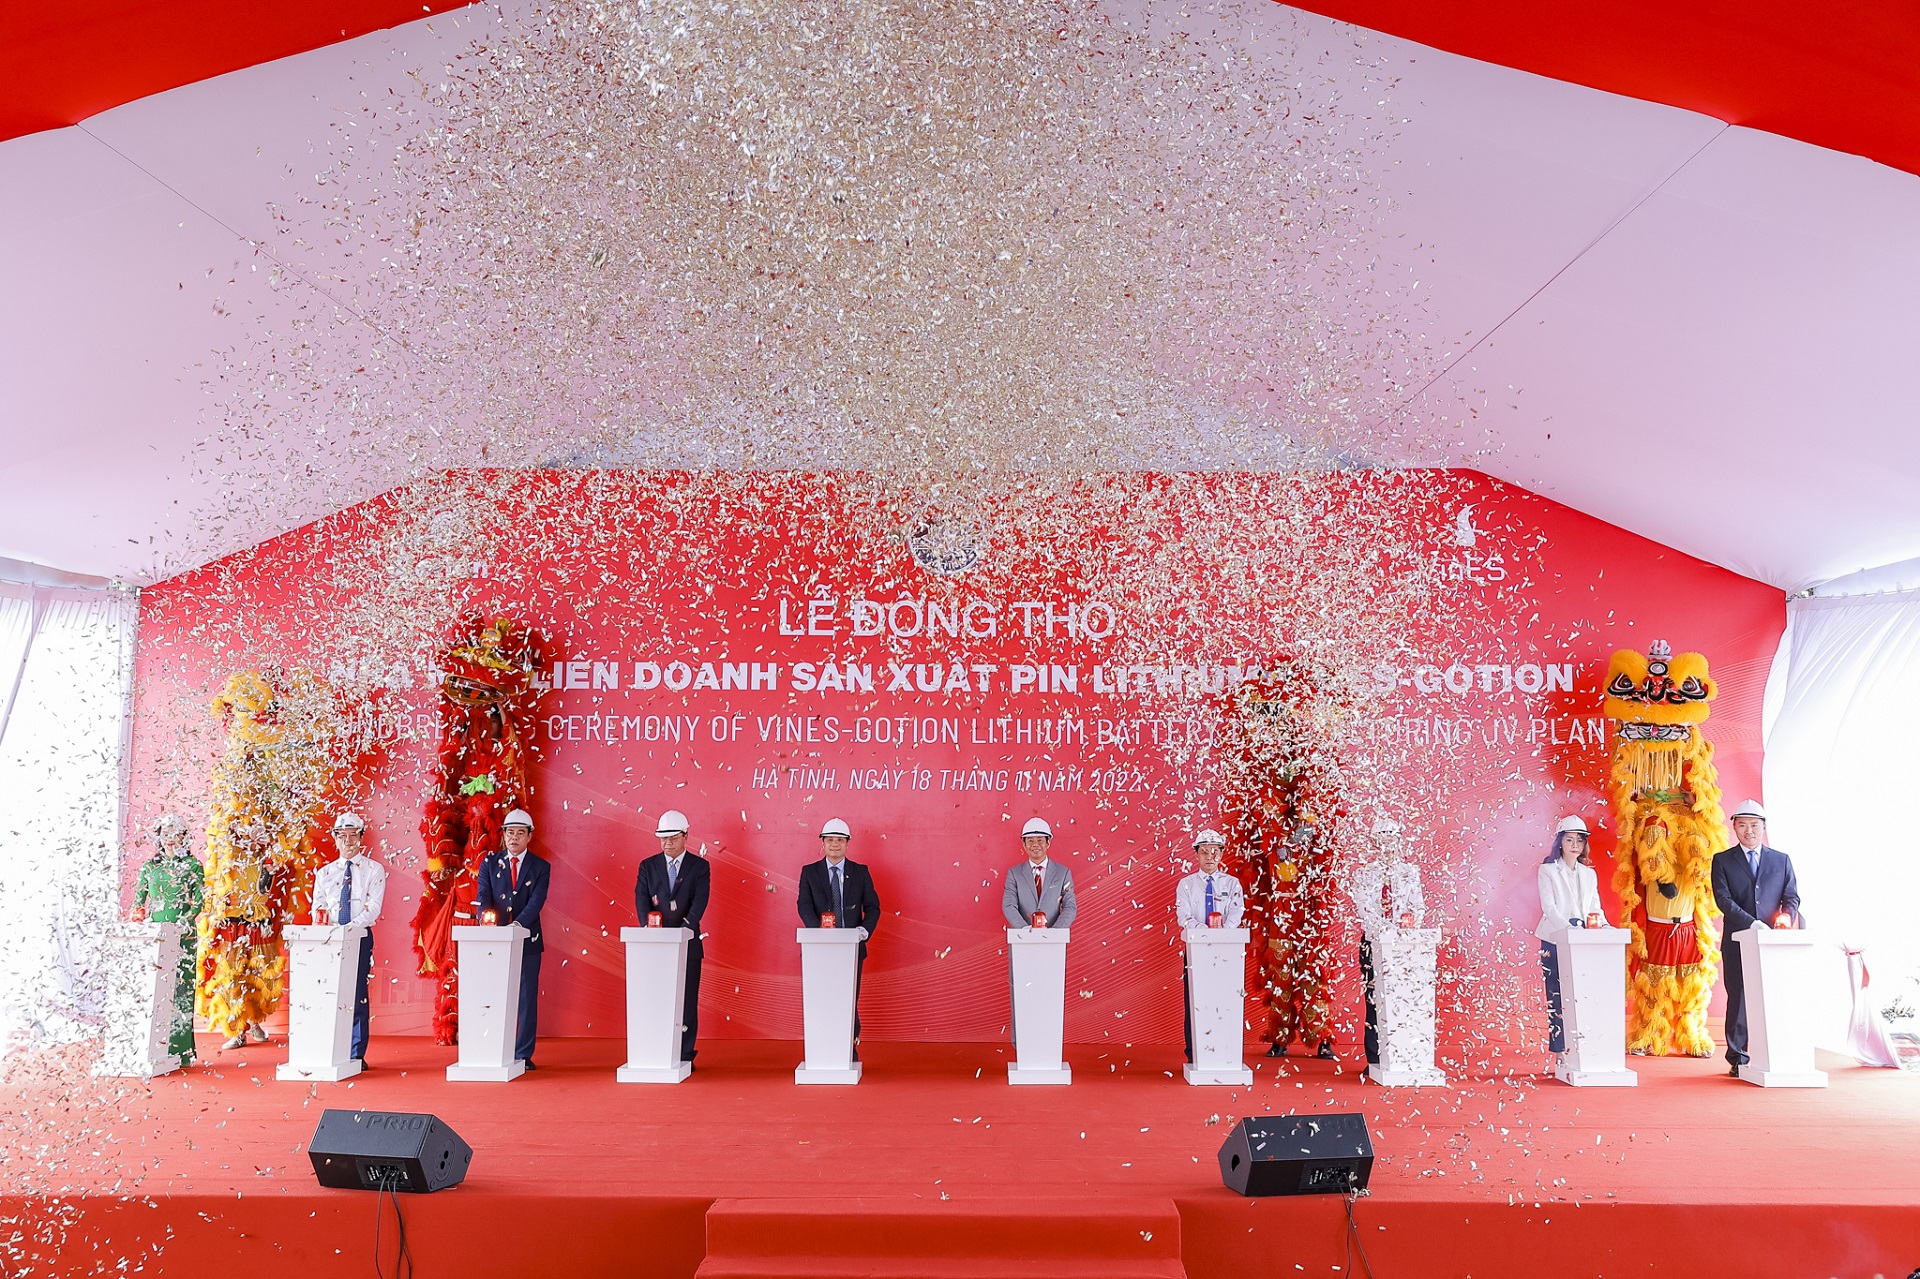 The groundbreaking ceremony of VinES and Gotion joint venture LFP battery factory